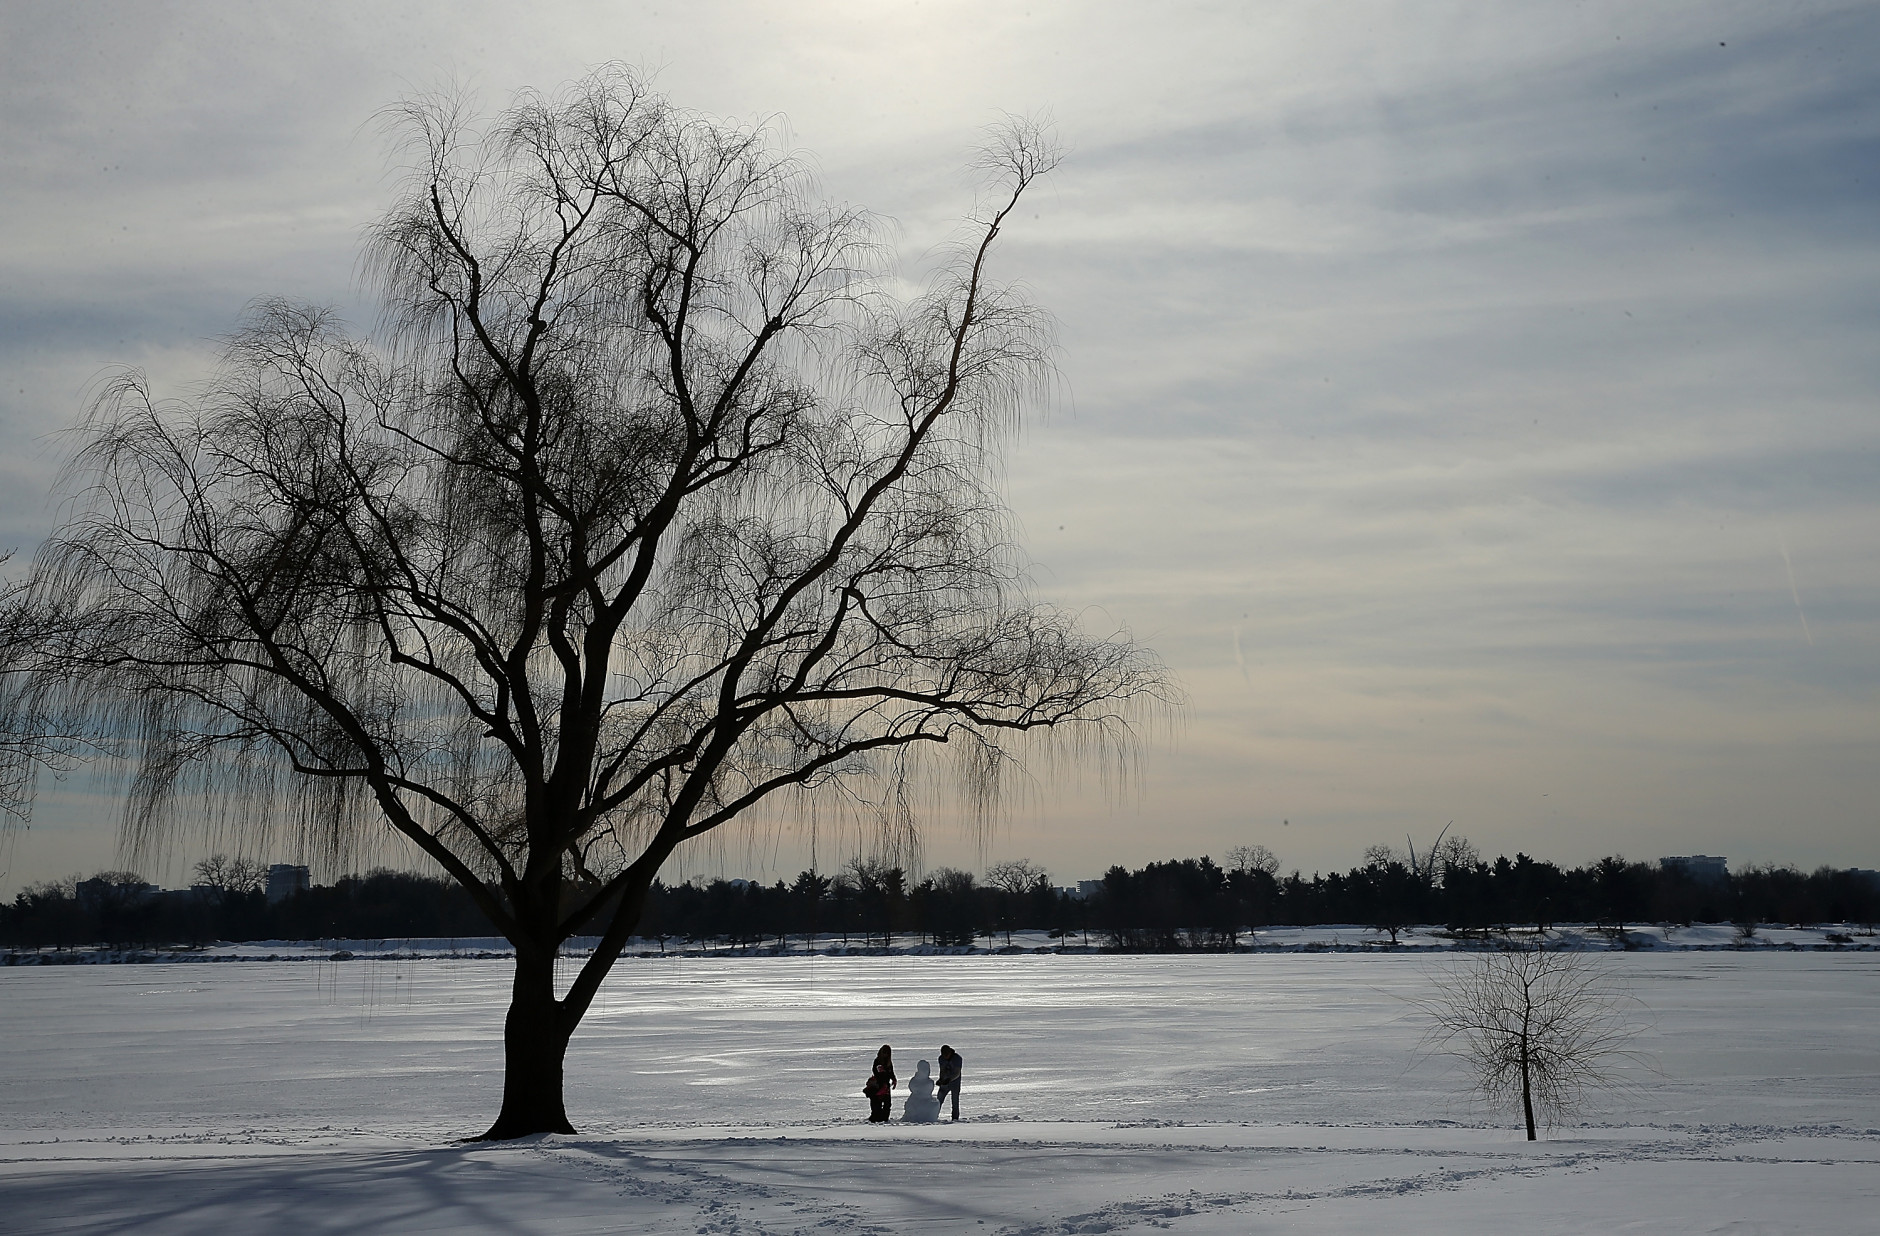 WASHINGTON, DC - JANUARY 25:  A family builds a snowman on the bank of the Potomac River near the Lincoln Memorial January 25, 2016 in Washington, DC. Winter Storm Jonas hit the East Coast over the weekend, breaking snowfall records, closing places of work, causing 29 storm-related deaths, leaving thousands of homes without power and serious flooding in coastal areas.  (Photo by Win McNamee/Getty Images)